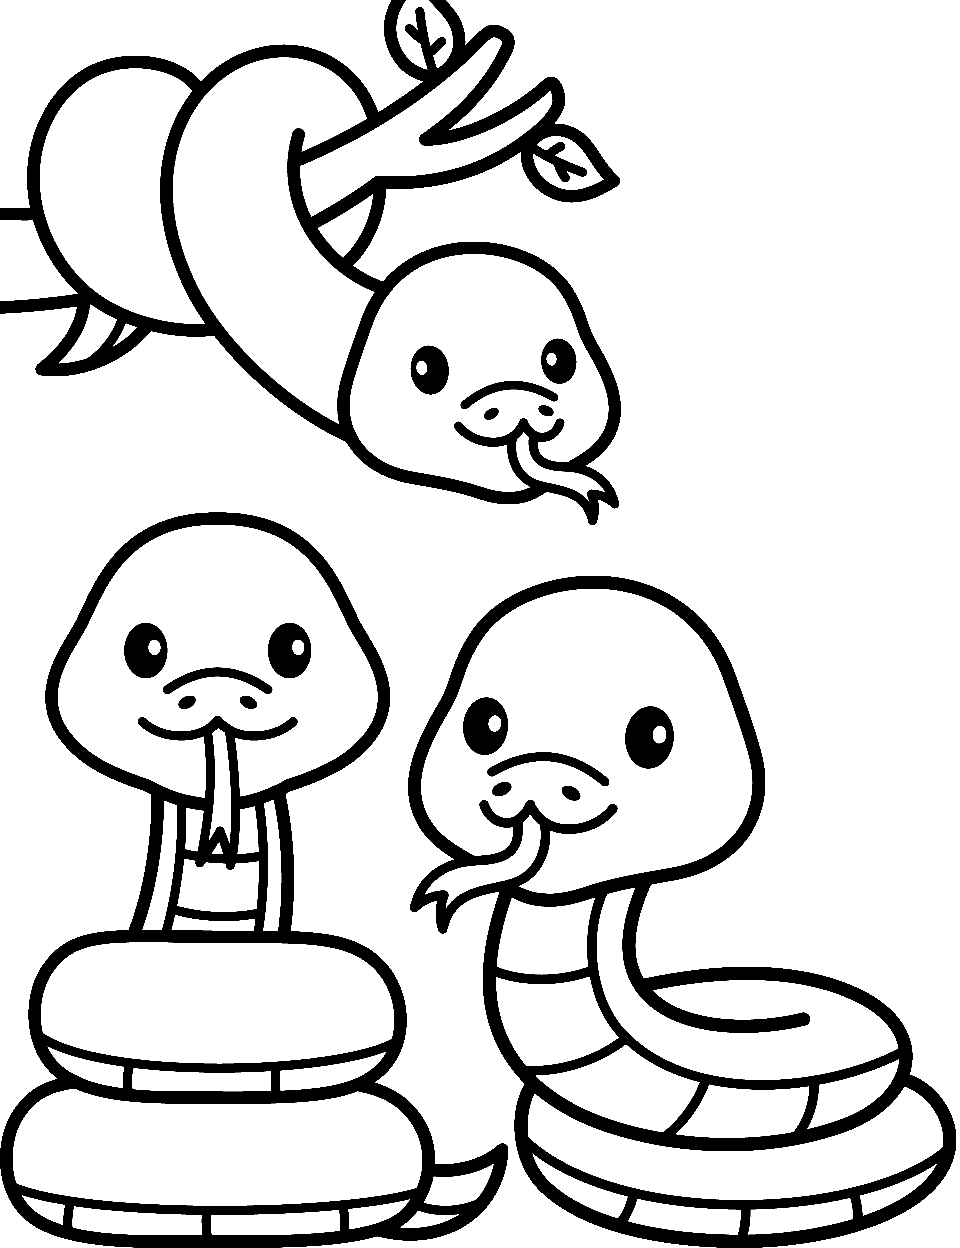 Preschool Playful Snakes Coloring Page - Colorful and friendly-looking snakes with cute eyes, perfect for young kids.